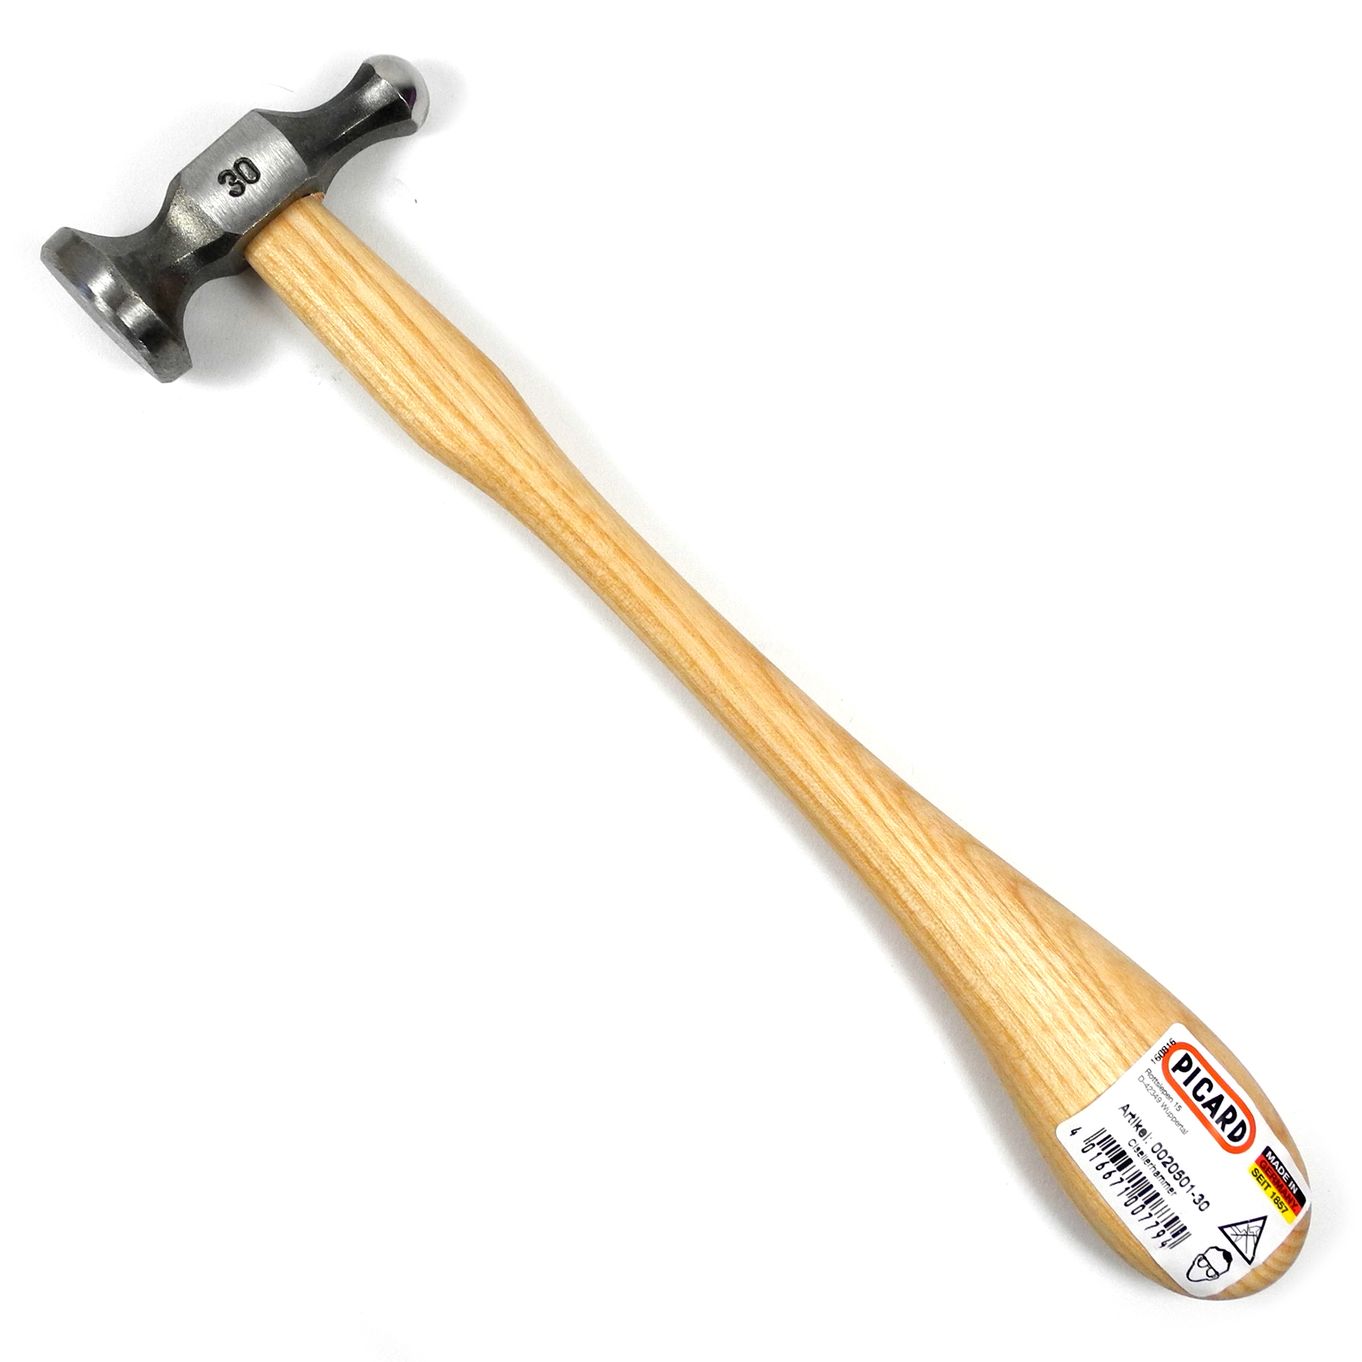 5oz German Style Chasing Hammer w/Wooden Handle - Santa Fe Jewelers Supply  : Santa Fe Jewelers Supply